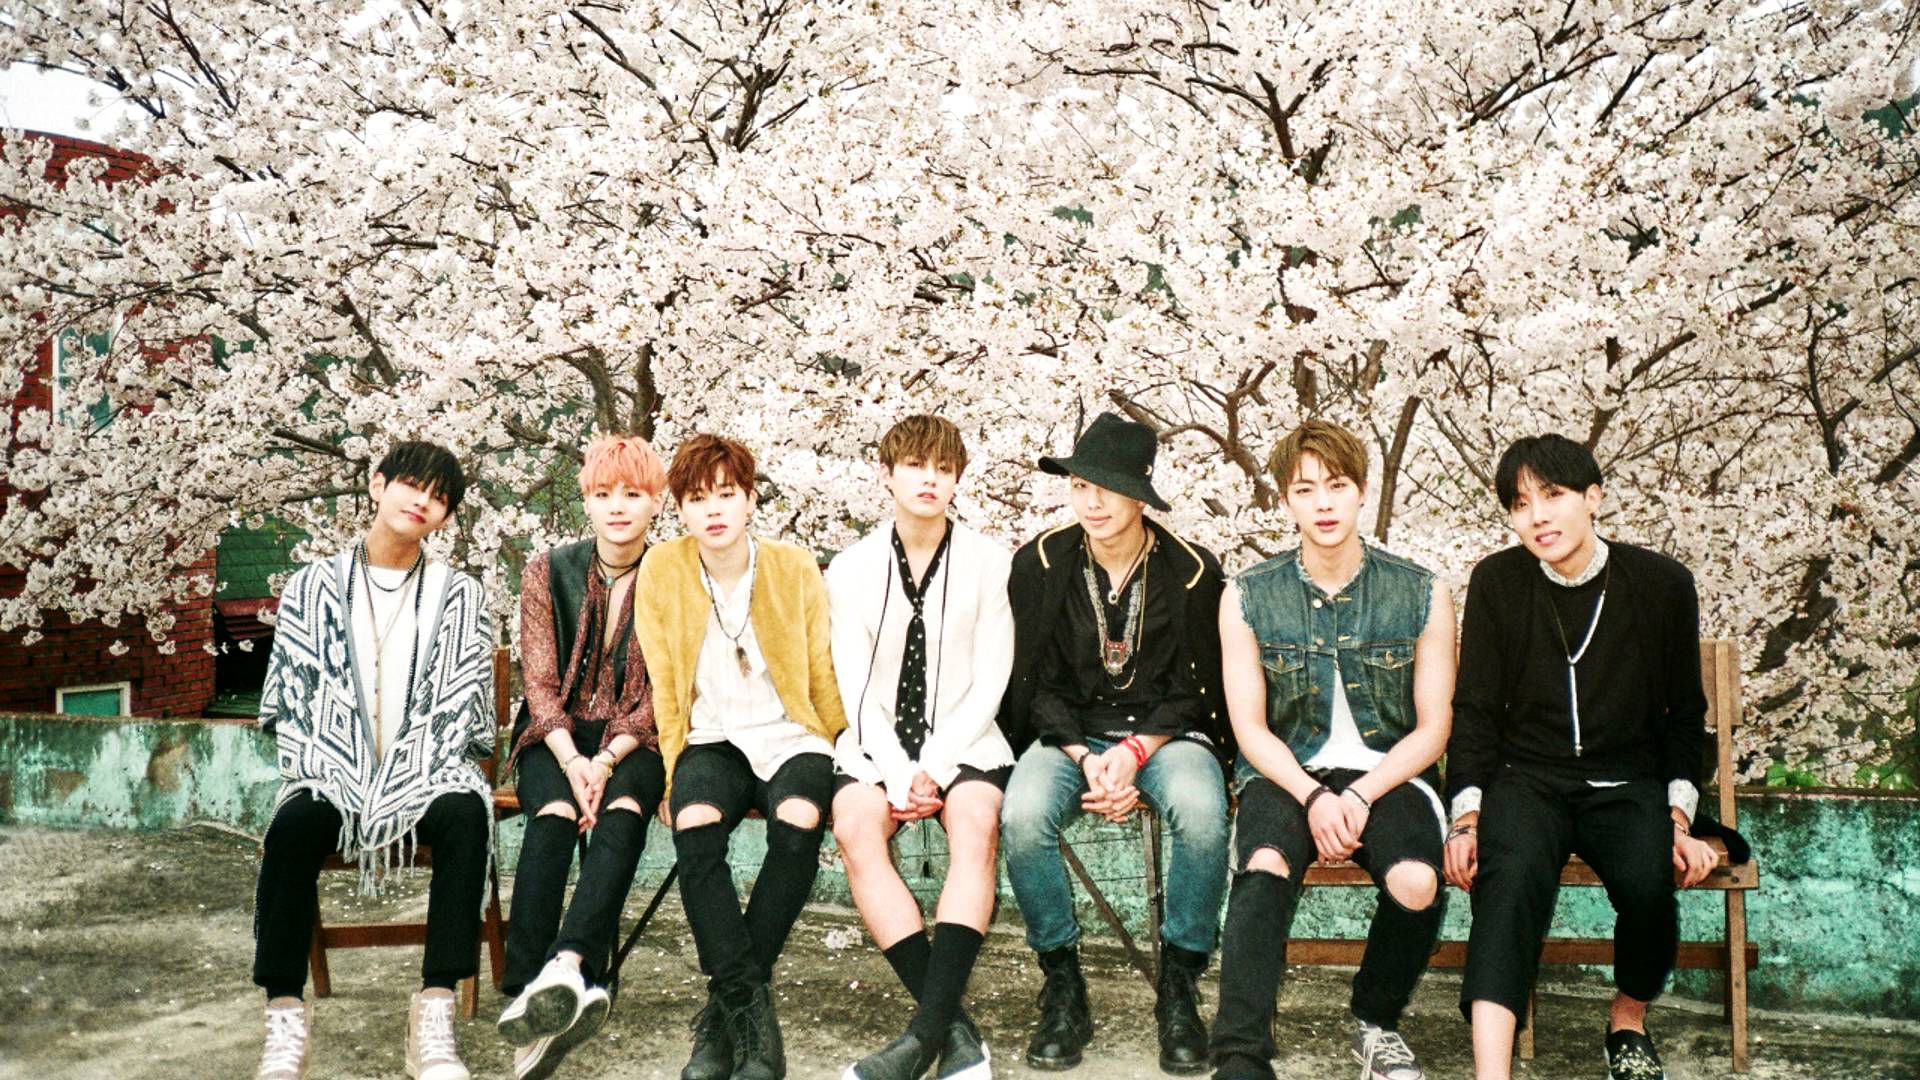 Bts Wallpaper Puter Image In Collection